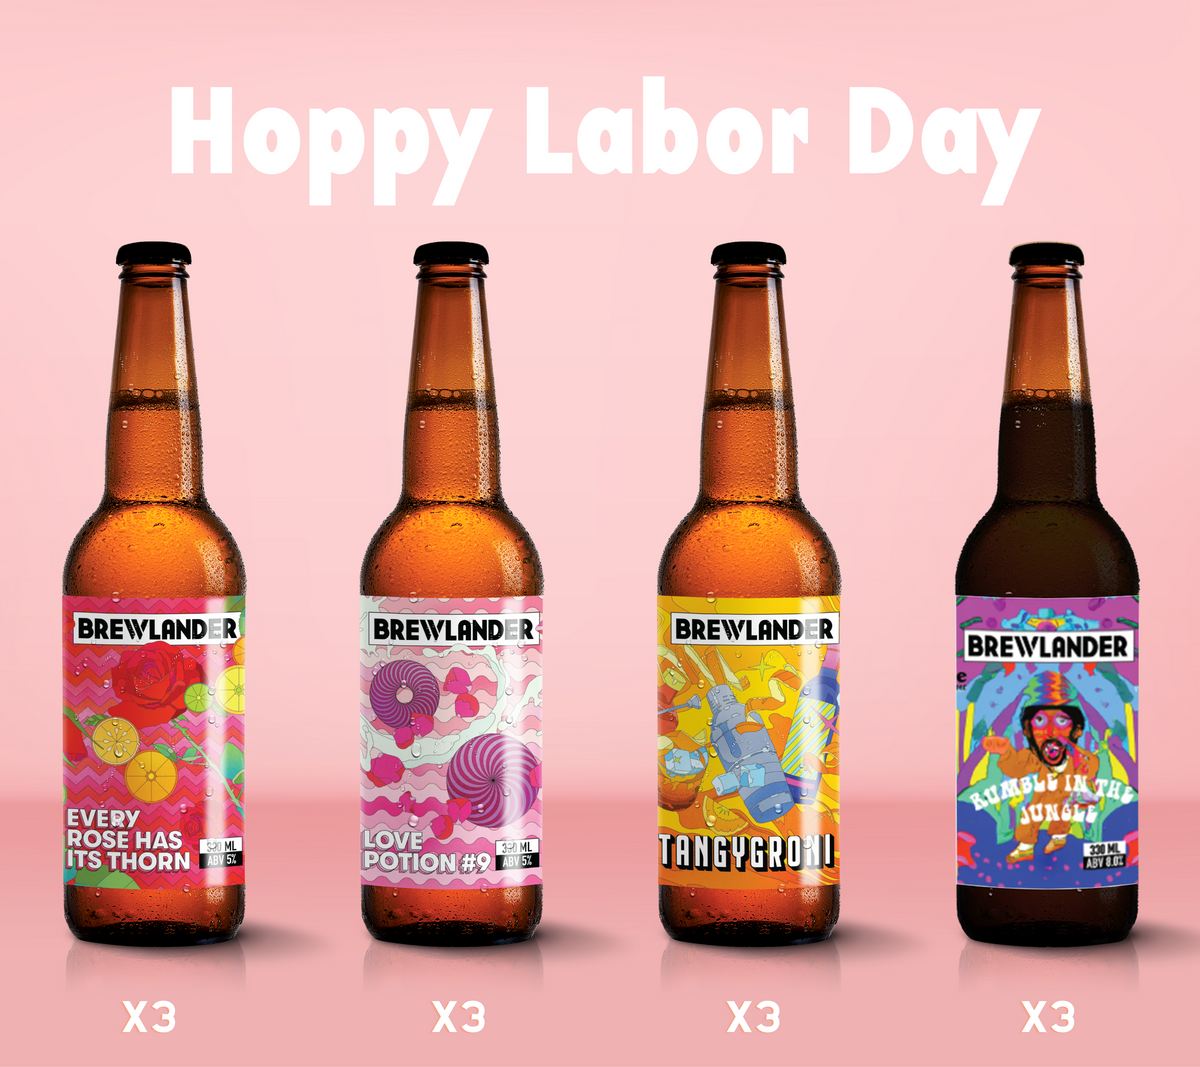 Hoppy Labour Day Beer Box